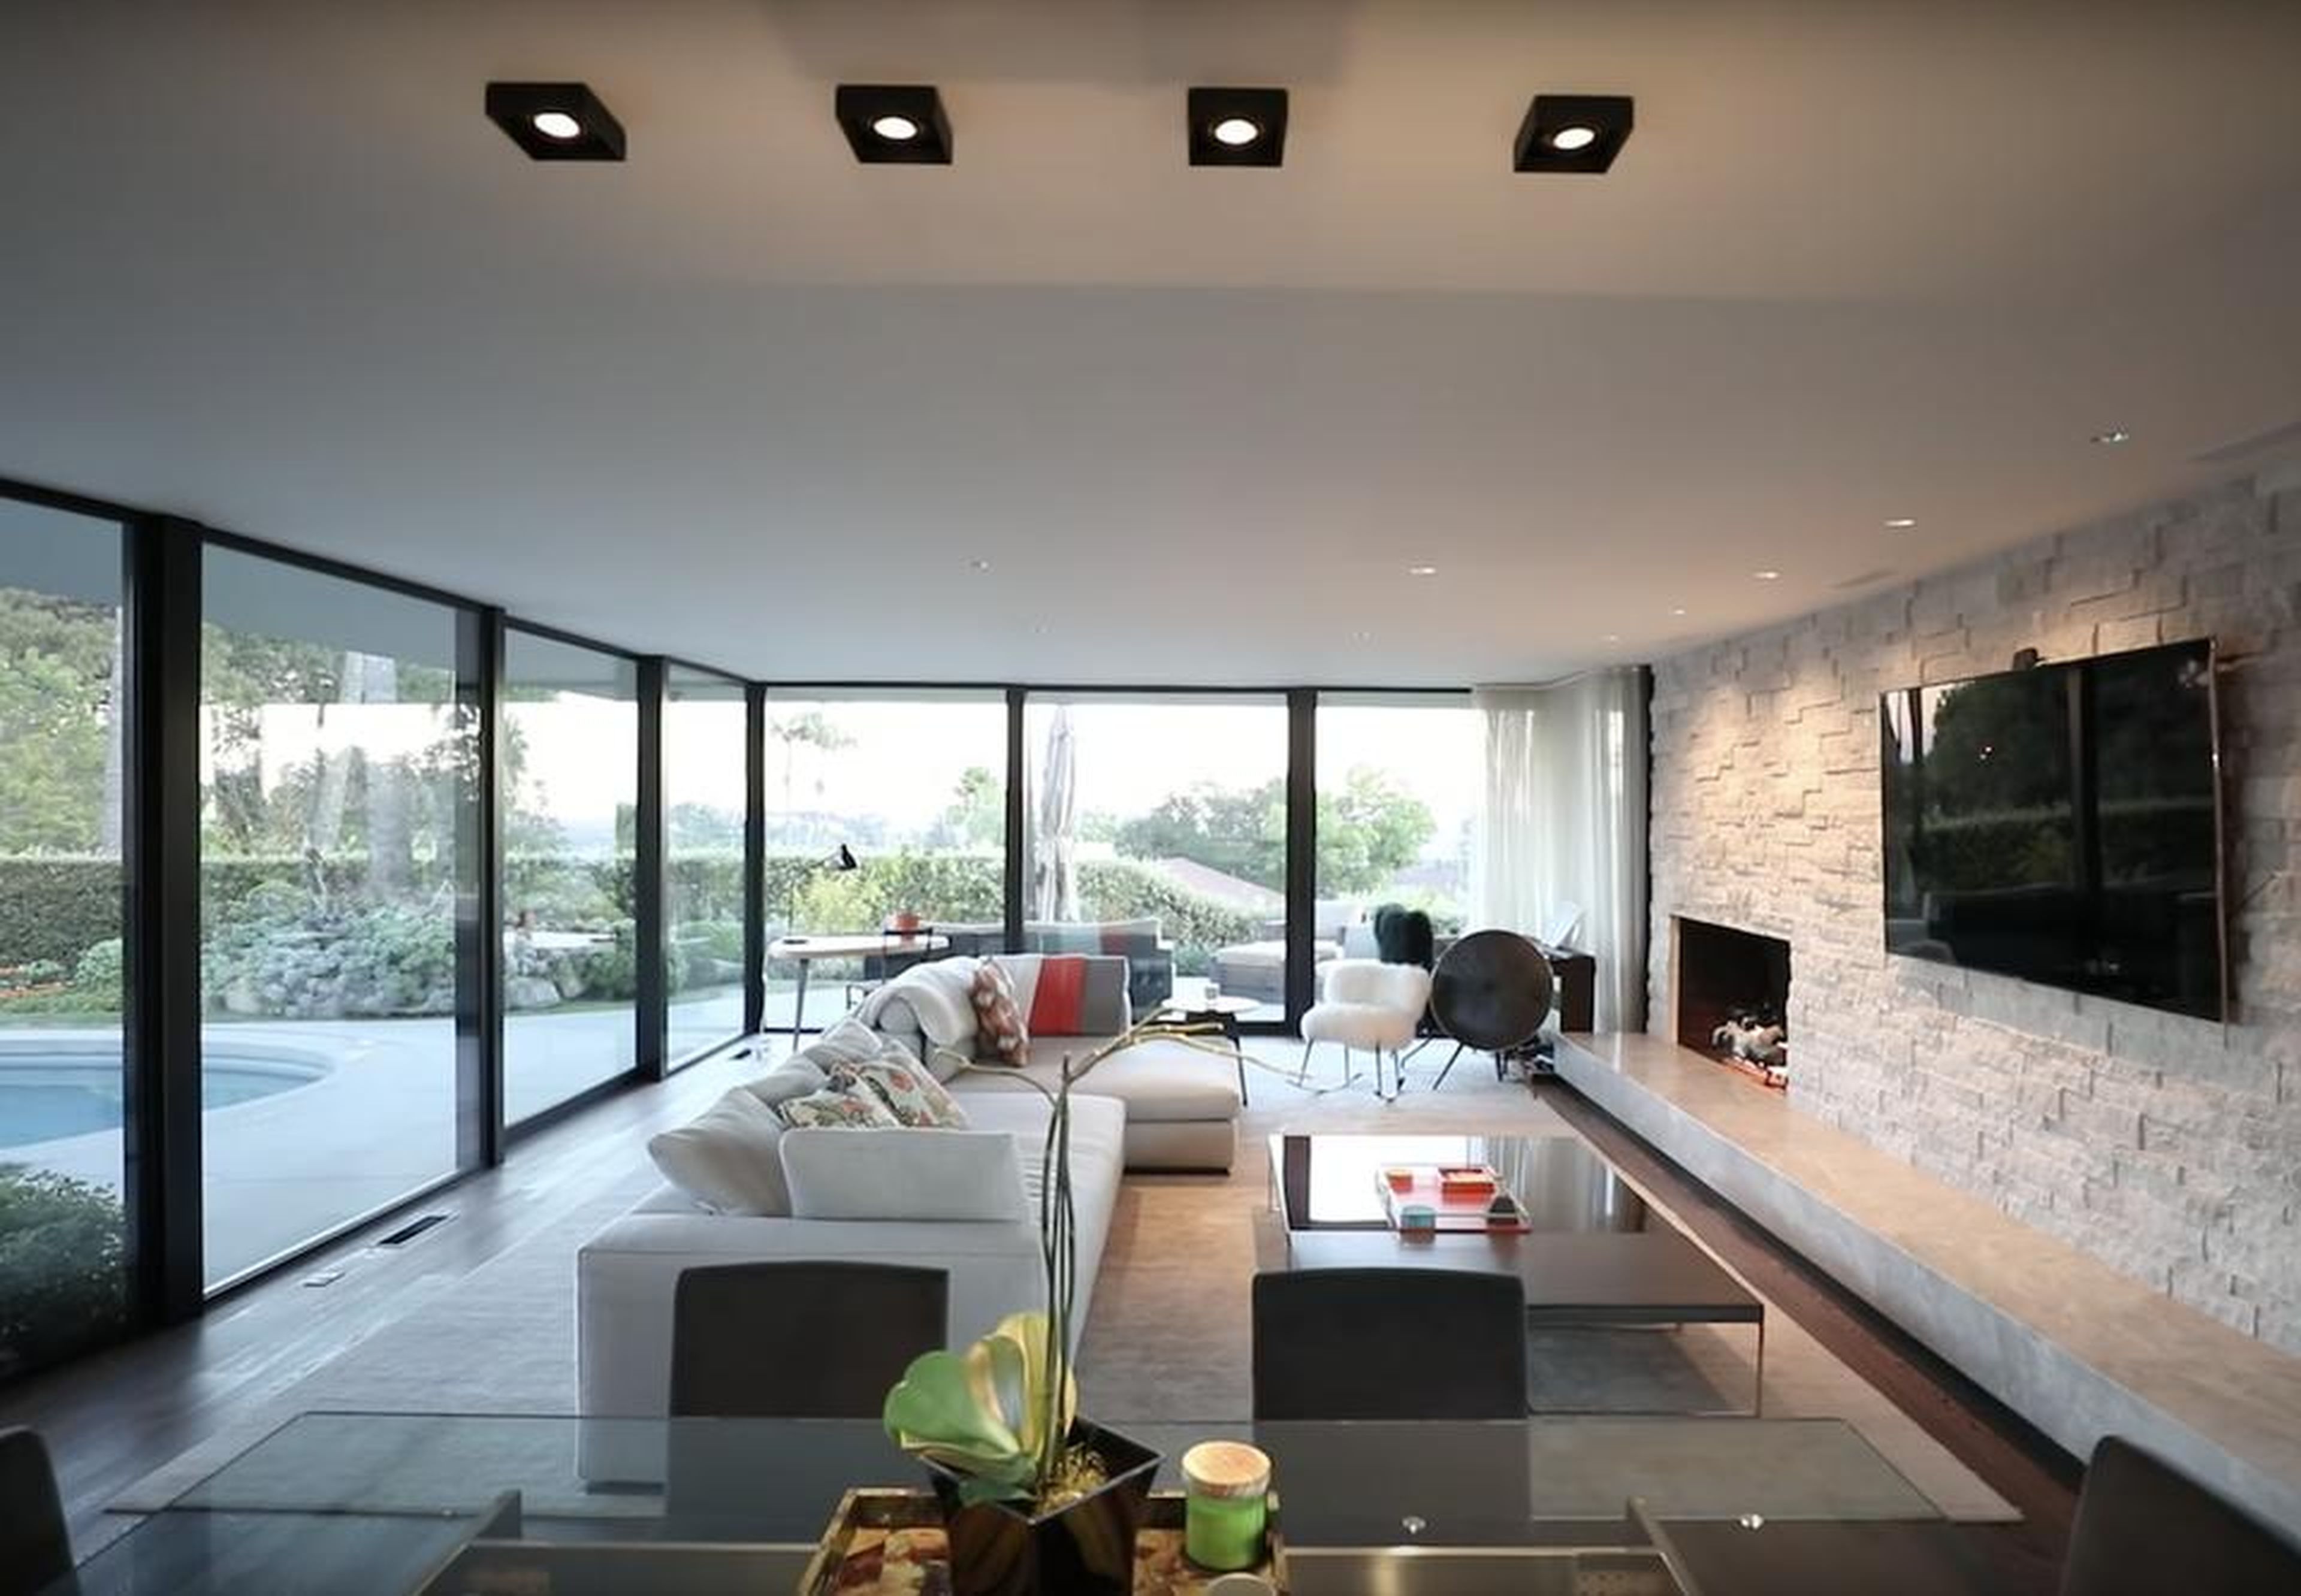 Once inside, huge floor-to-ceiling windows let in natural light to the open living space.